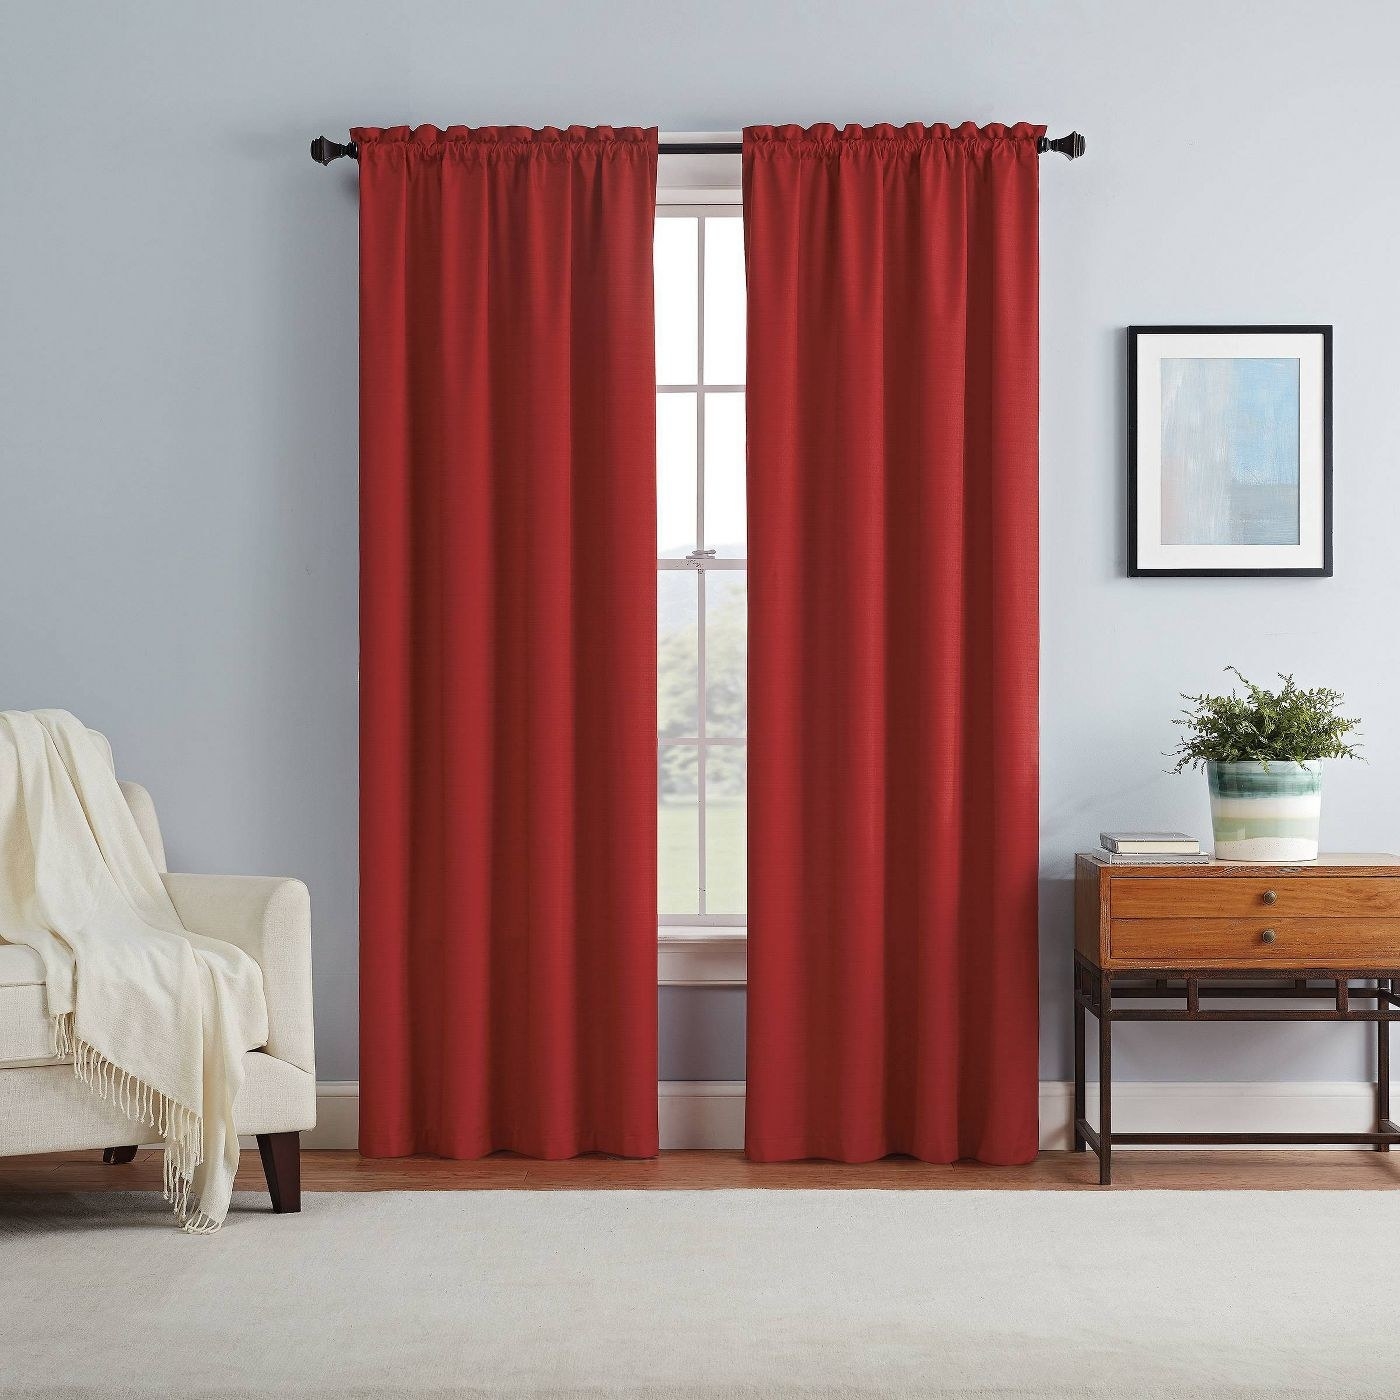 Red blackout curtains in a home